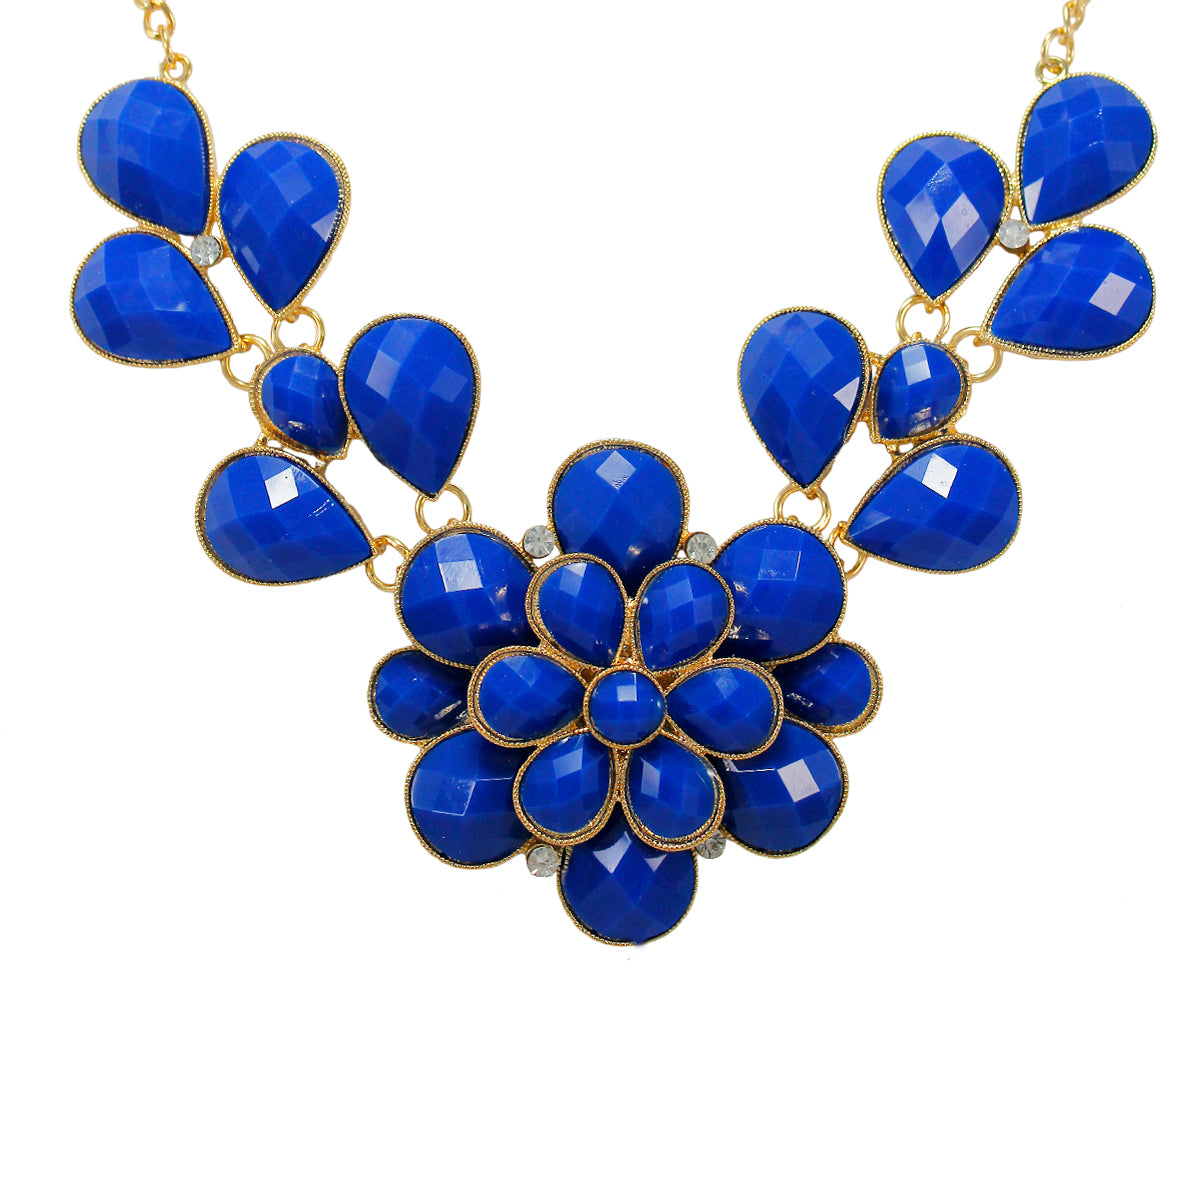 Beautiful Designer Golden Floral Necklace with Blue crystal Stones